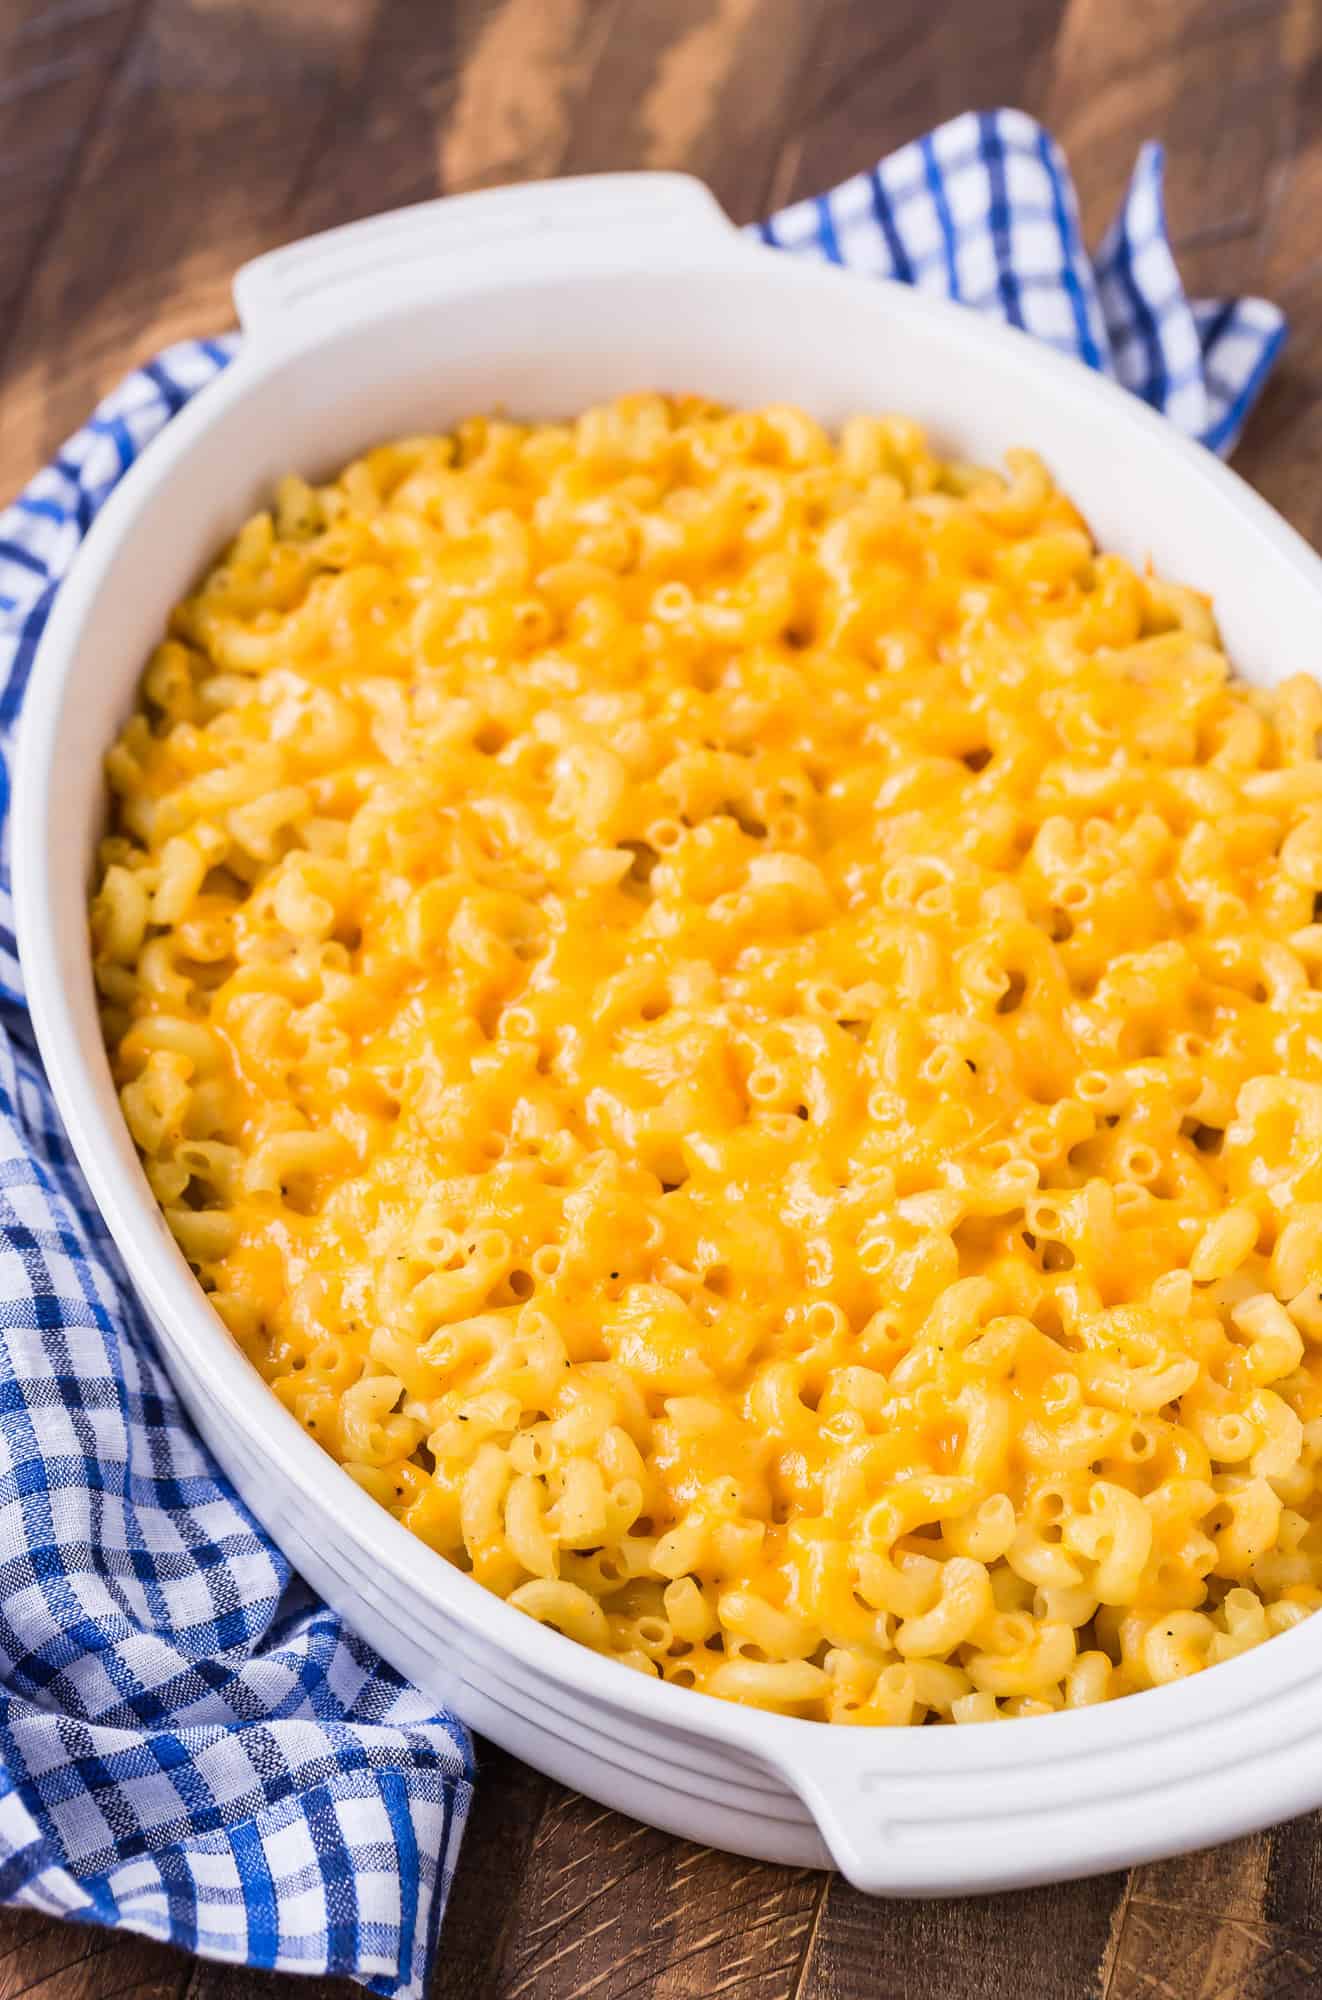 Baked macaroni and cheese in white baking dish.